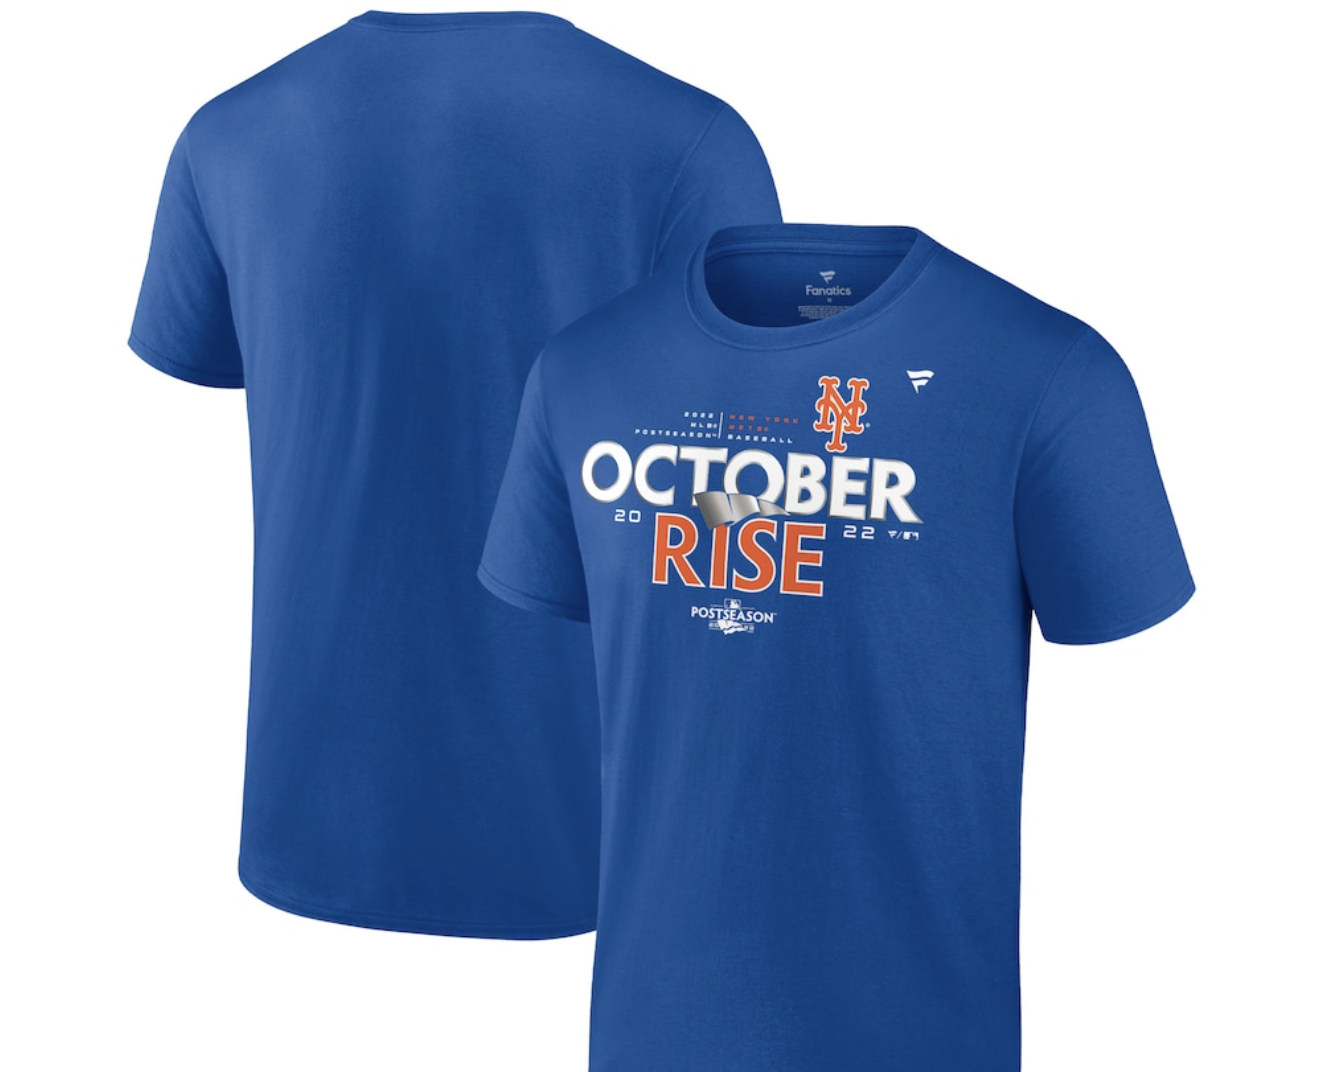 Mets Team Store on X: Our #postseason merch trailer is stocked